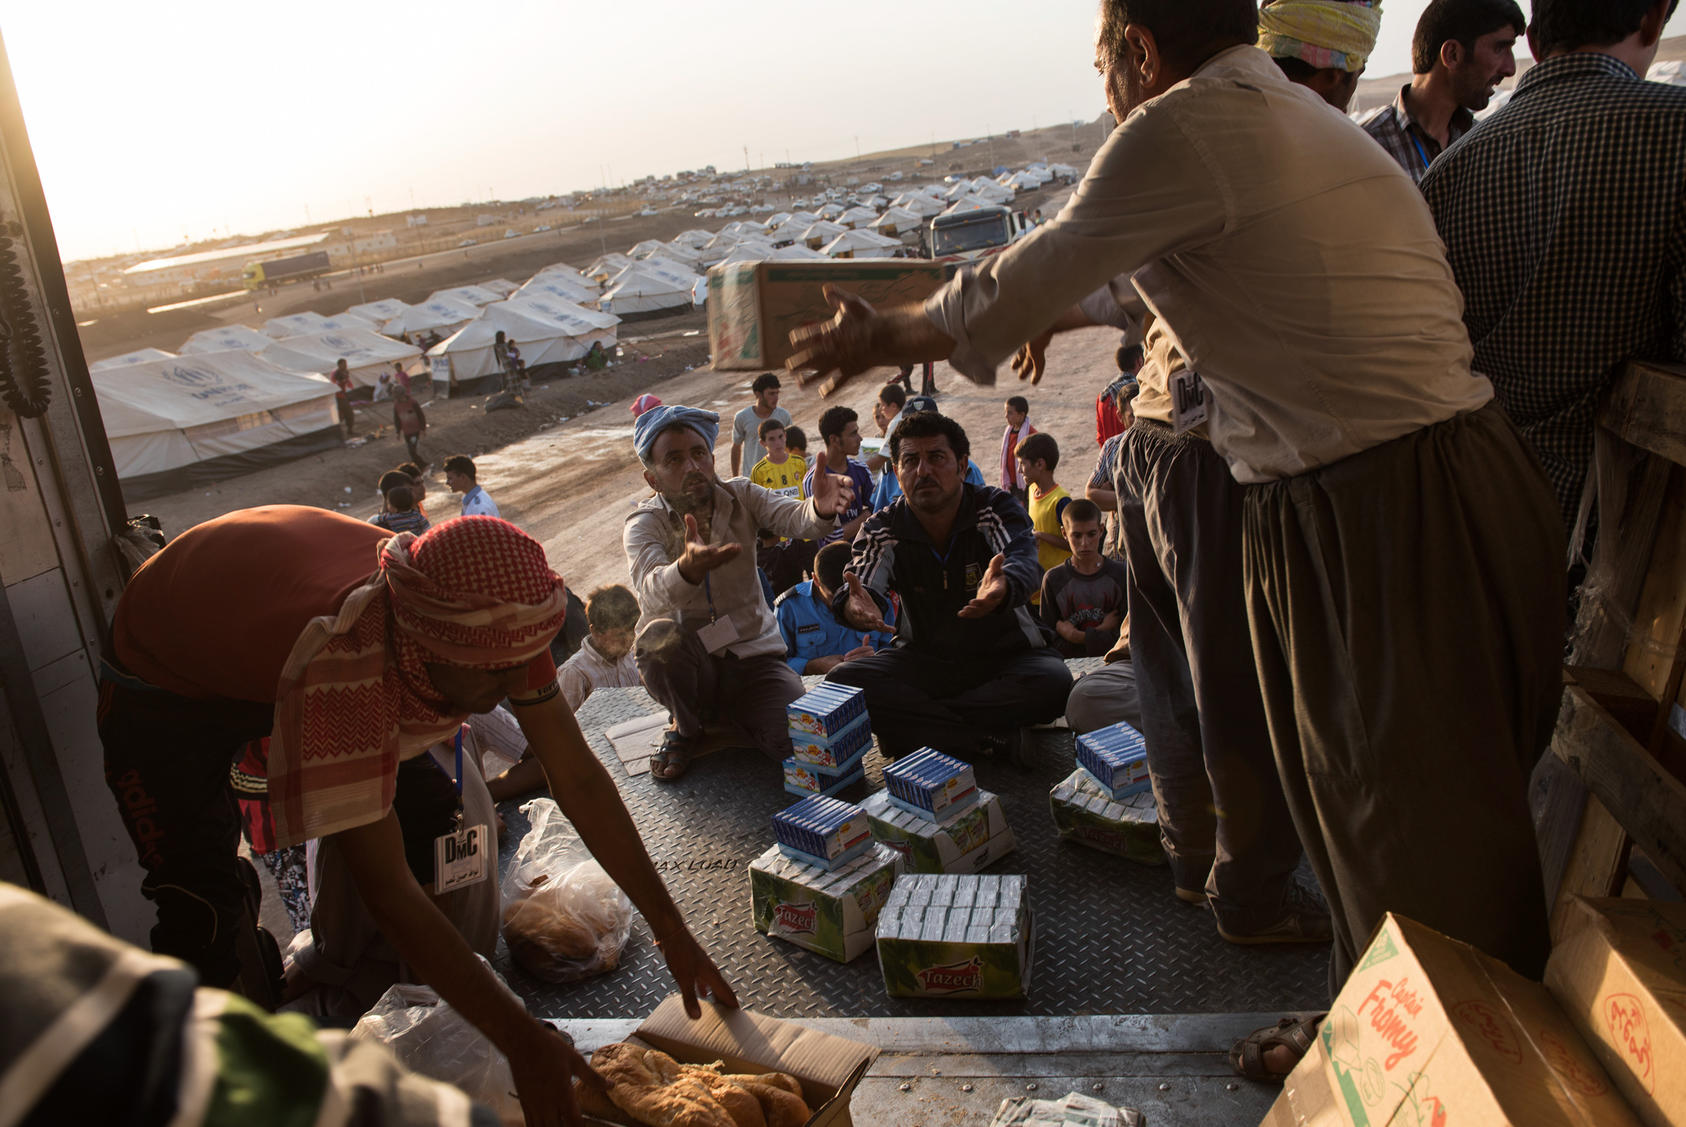 Men working on behalf of the Kurdish government hand out food and juice to Iraqi Yazidi families at the Bajid Kandal refugee camp in Dohuk Province, northern Iraq, Aug. 17, 2014. The spread of the Islamic State group has displaced many Christians and Yazidis.